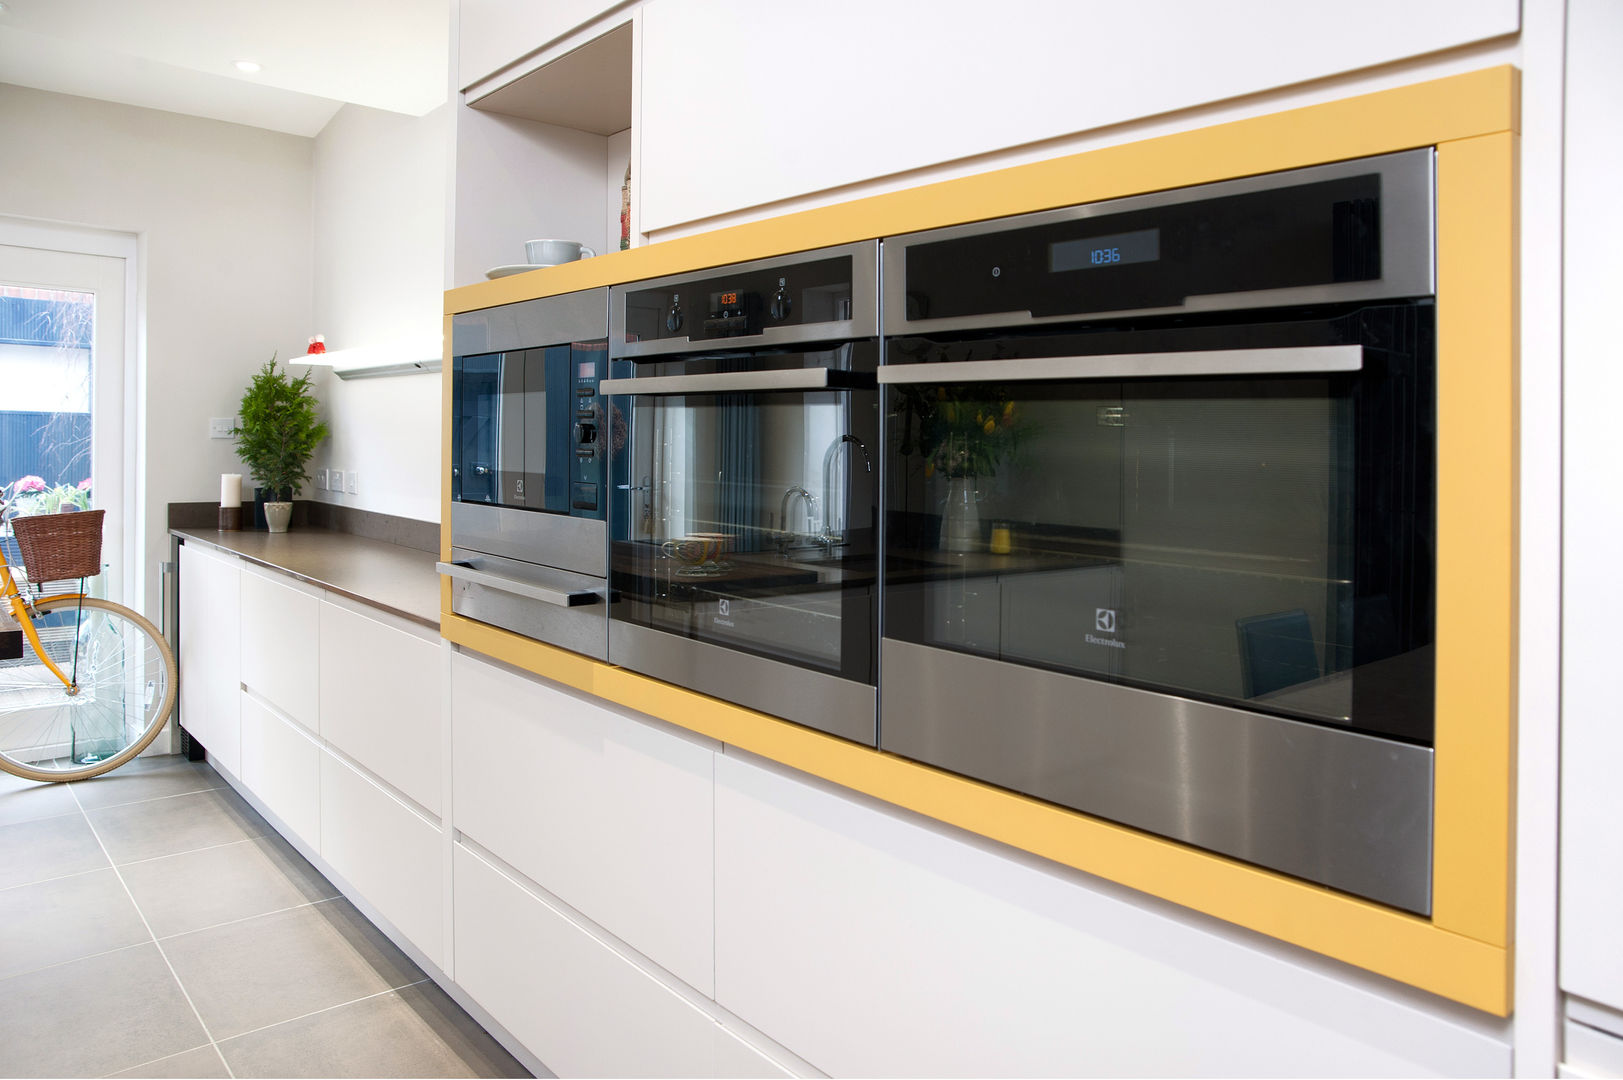 Electrolux appliances wrapped in Curry Yellow panelling Haus12 Interiors Cocinas modernas